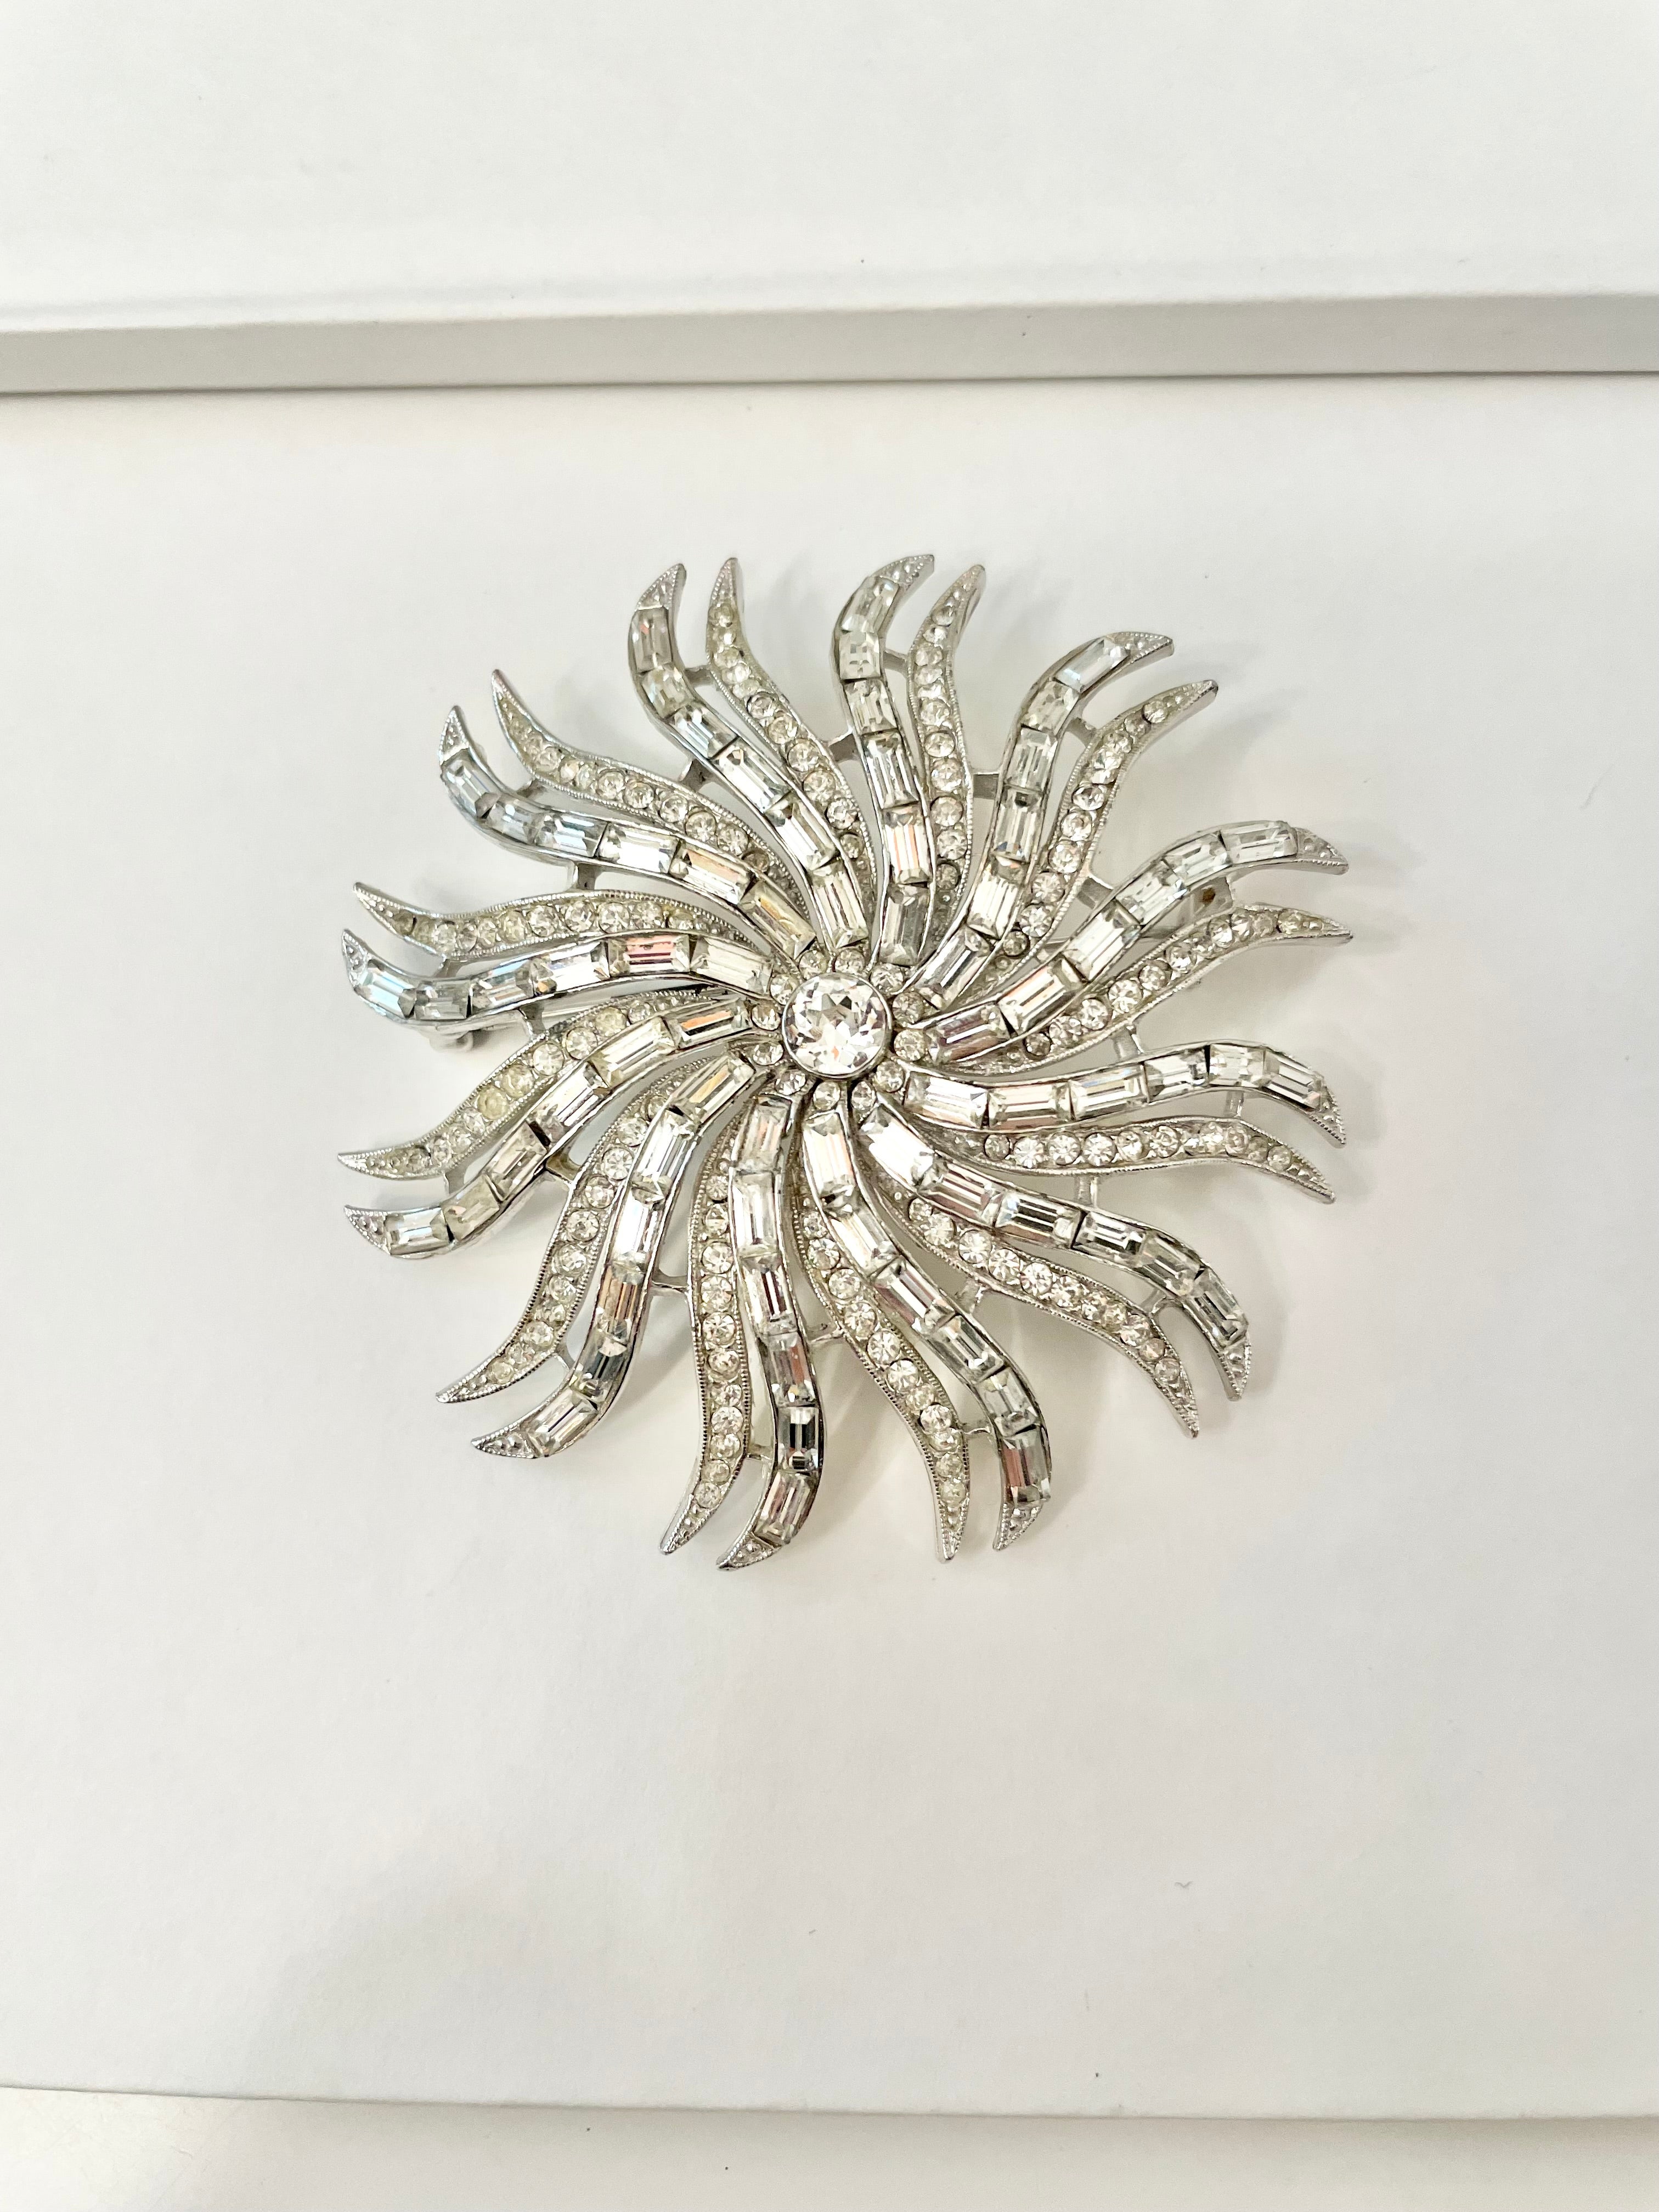 The 1960's Heiress and her diamond collection.. Oh my..this glass starburst brooch is so divine!!